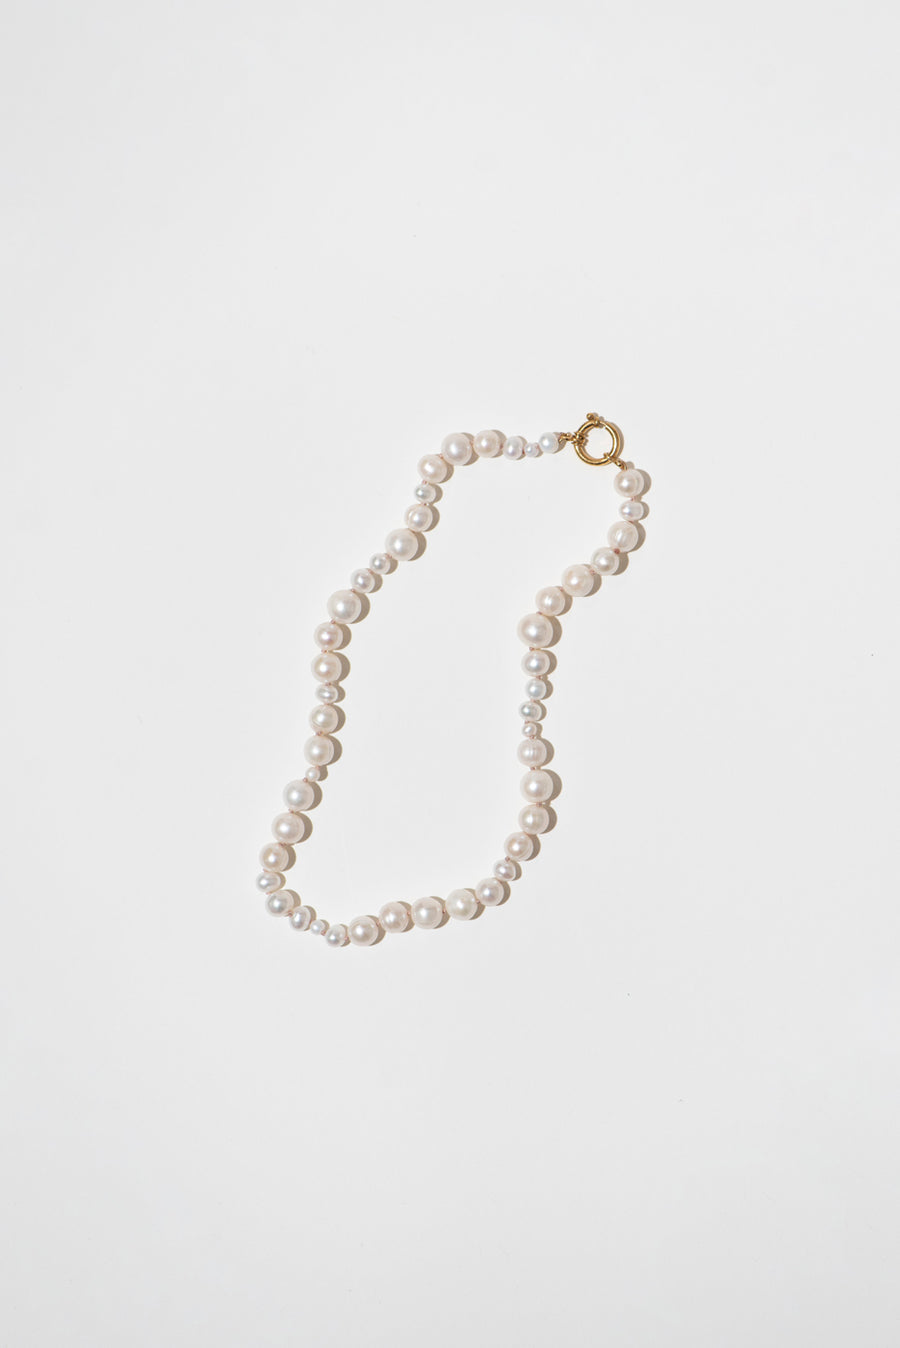 The Pearl Variation Beach Necklace - Short